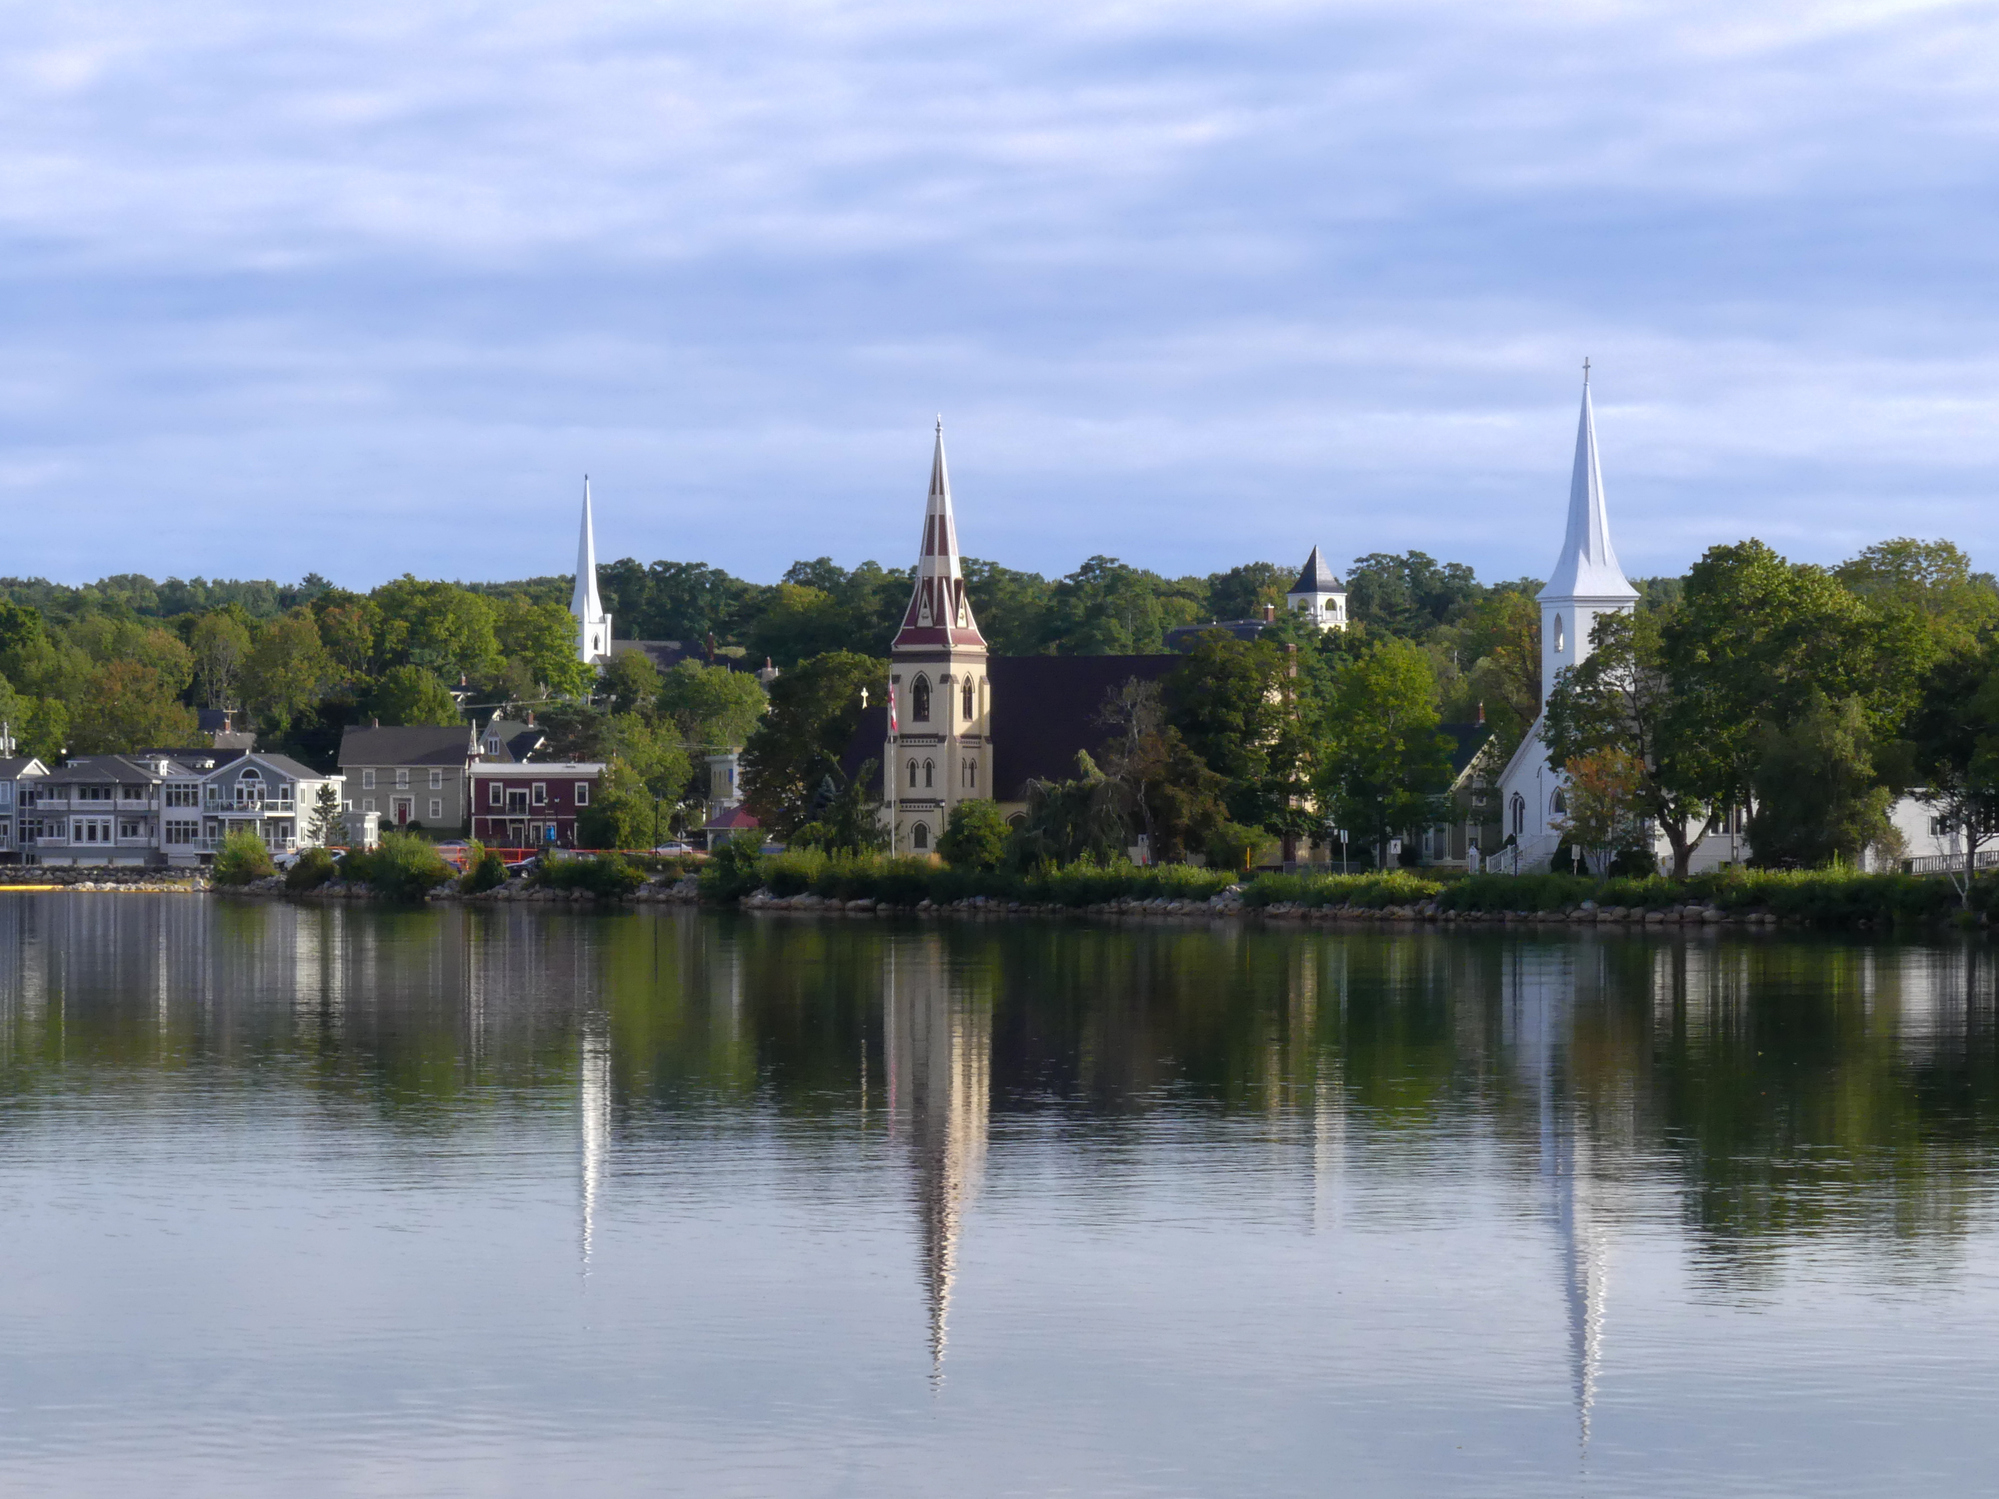 The serene coastal town of Mahone Bay presents a picturesque scene captured in this photo. Dominating the skyline are the iconic three churches that stand proudly against the backdrop of a clear blue sky.